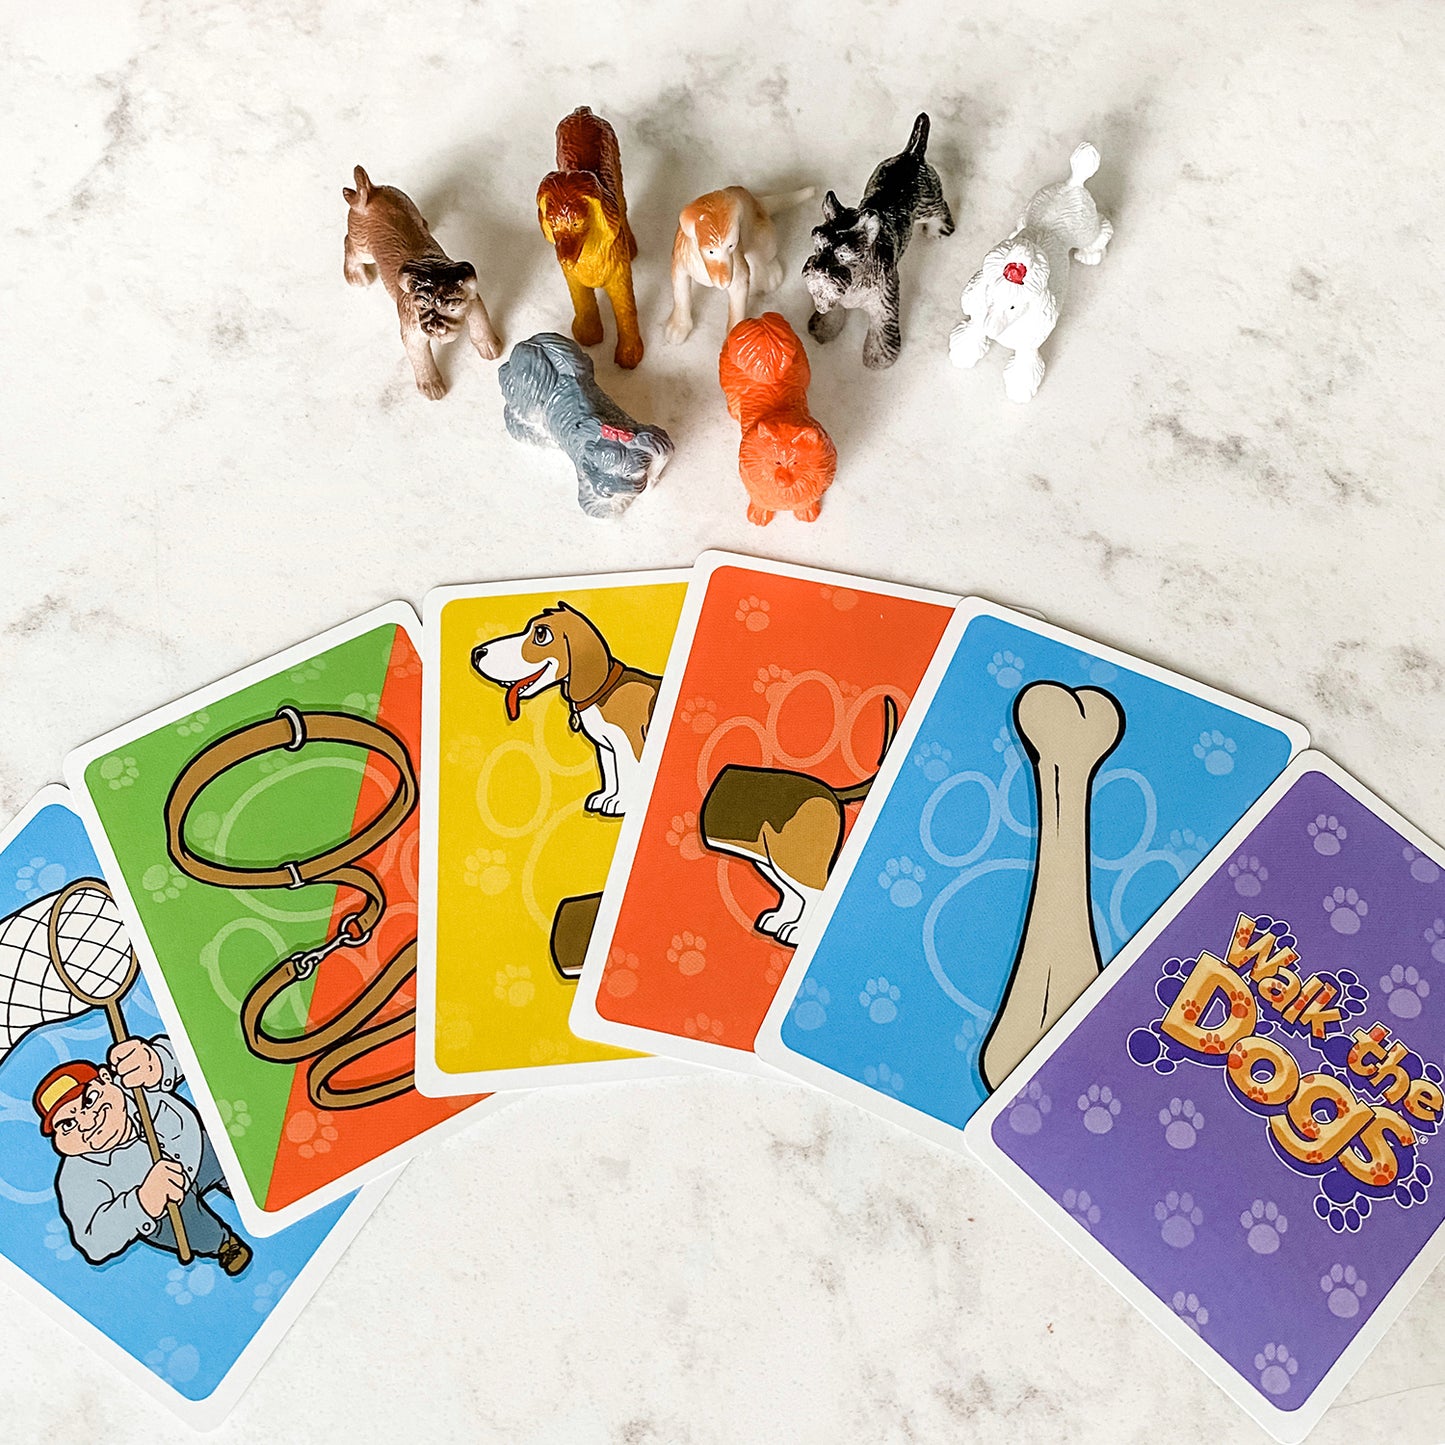 Walk the Dogs by SimplyFun is a math game featuring 63 adorable dogs and focusing on counting and multiplication.